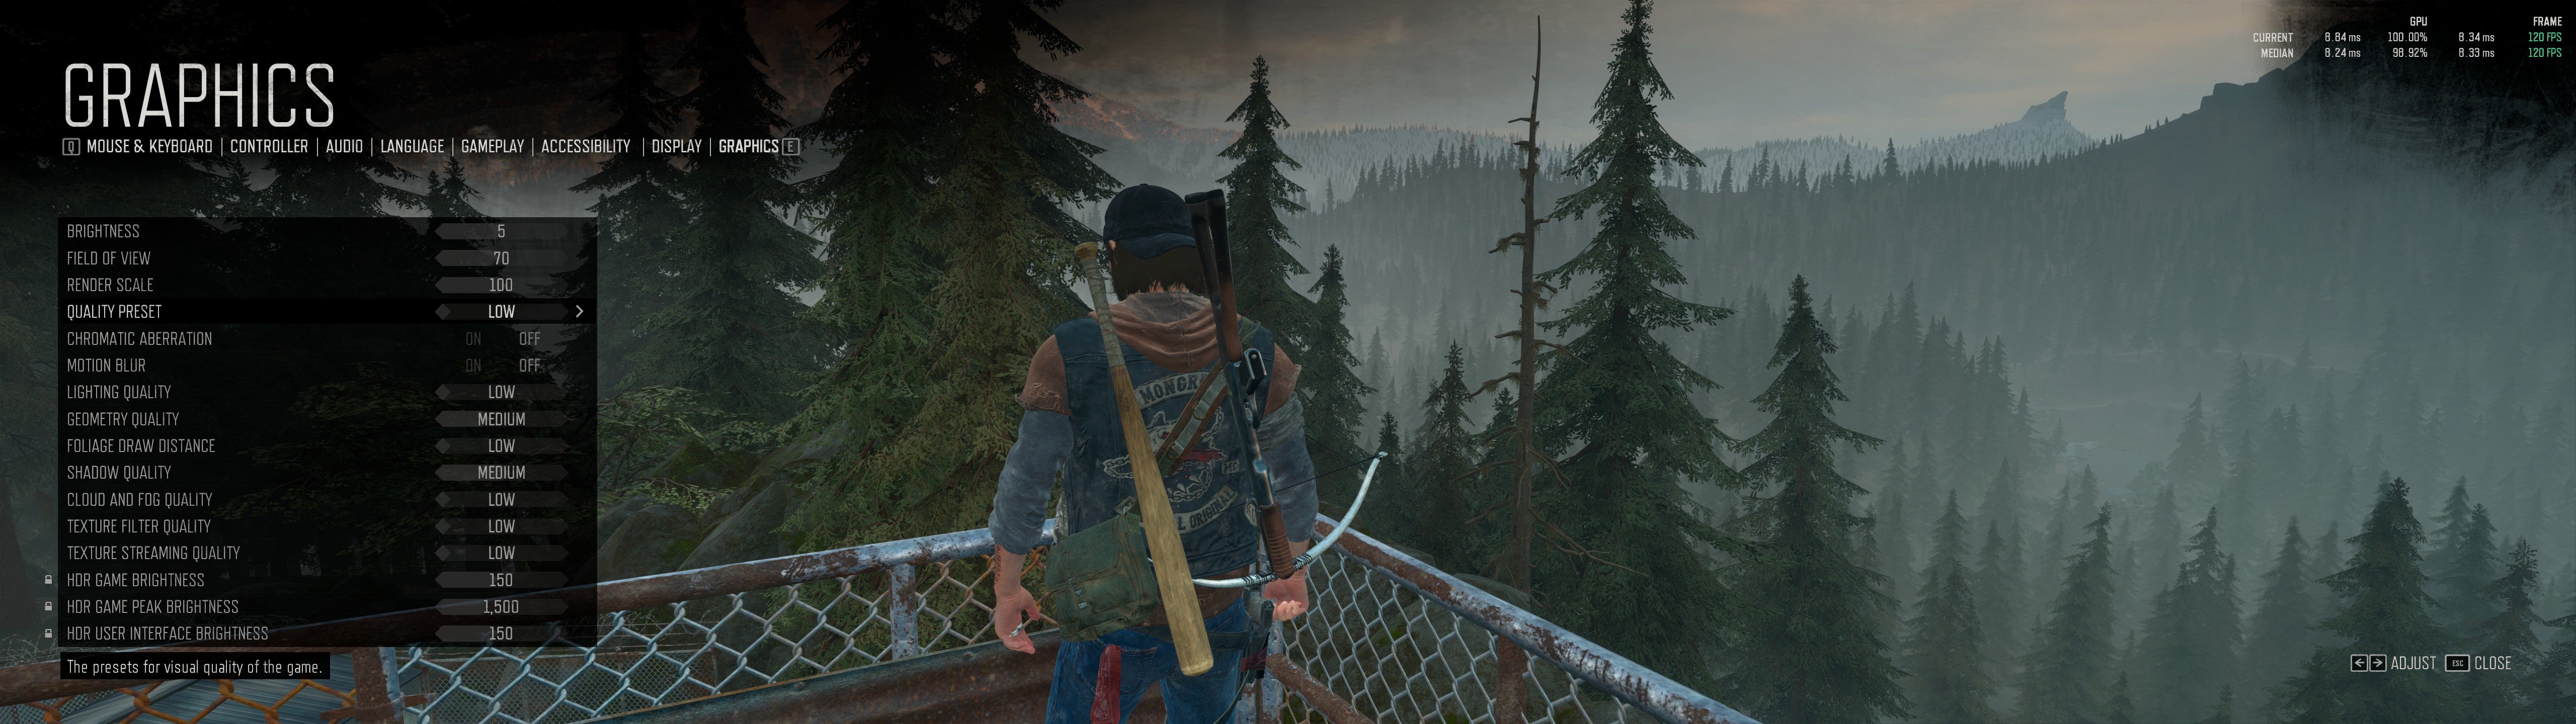 Days Gone's PC graphics menu showing the game using the Low quality preset